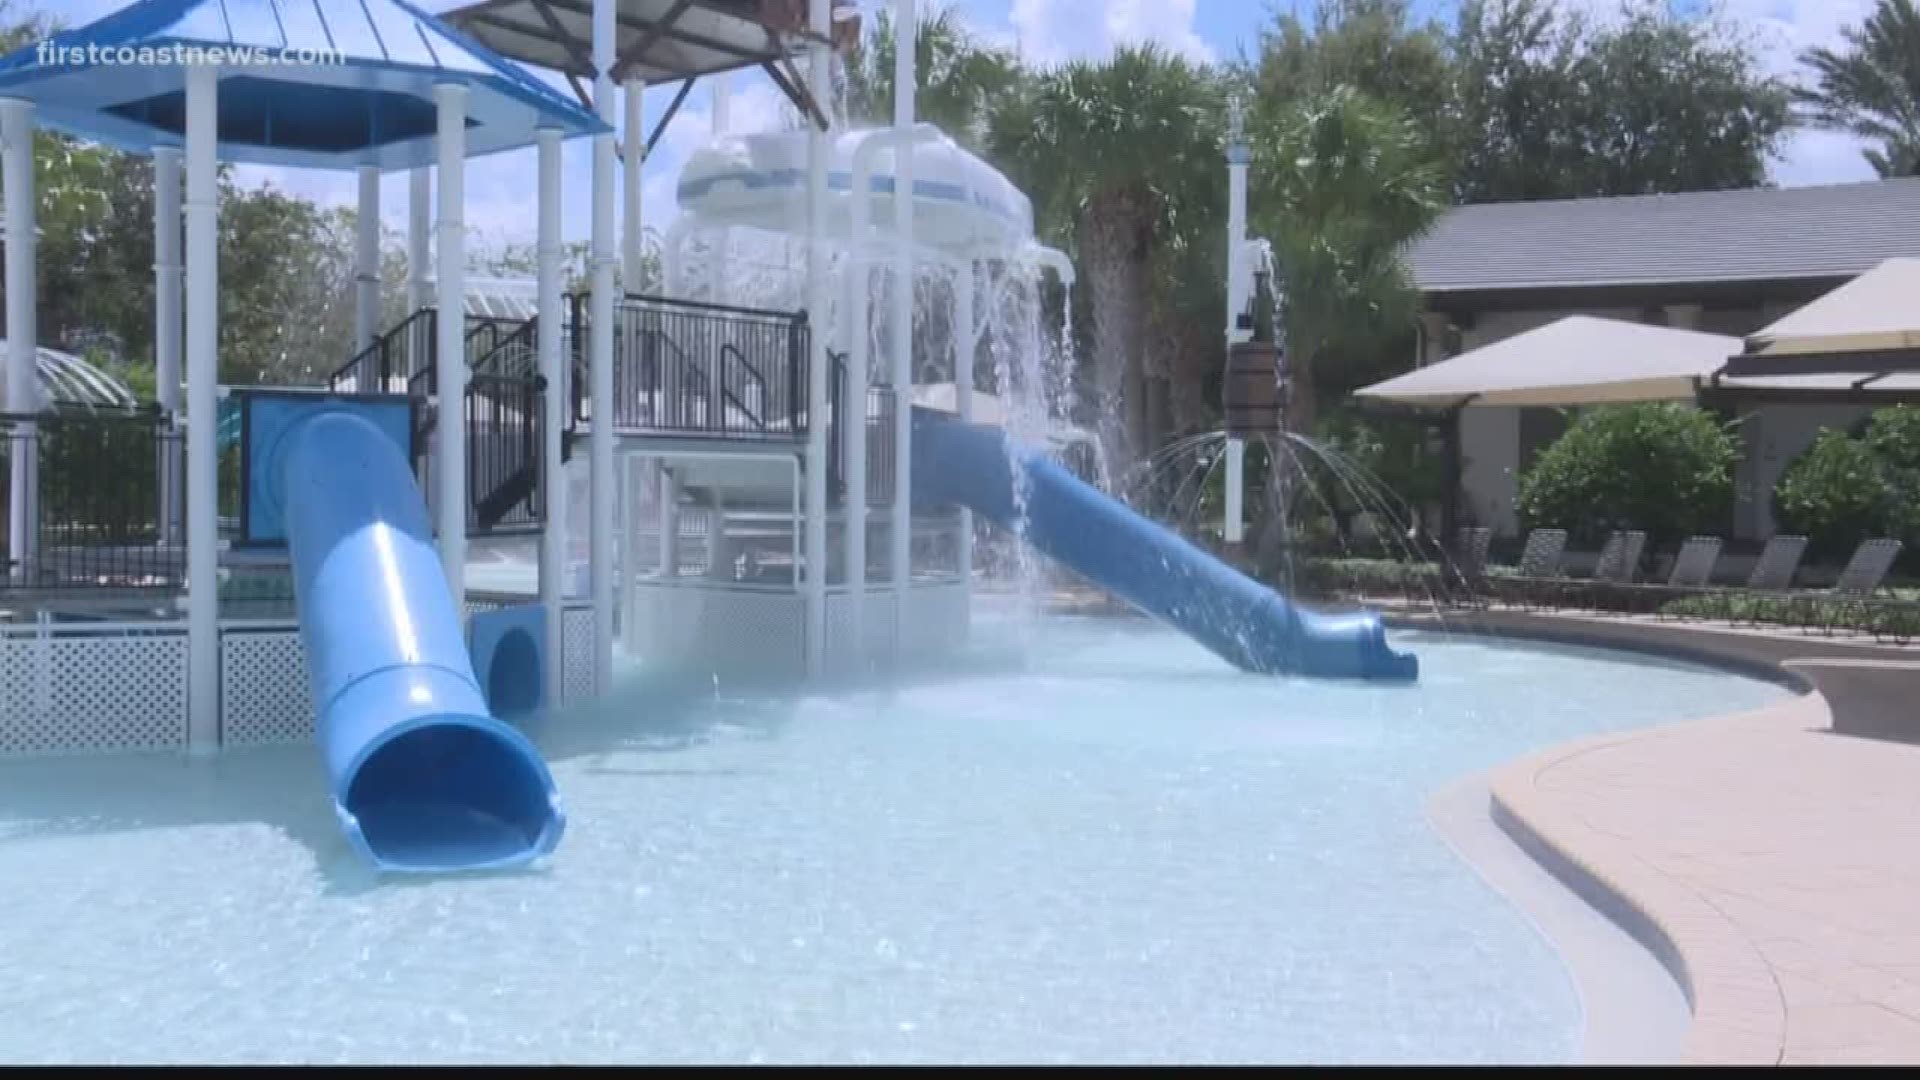 Some parents noticed their children were sick over the after they visited the Nocatee Splash Waterpark, concerned there could be something in the water. Management hired an independent water testing company to test the waters and expect answers on Friday, but do not expect this illness to be linked to the waterpark.